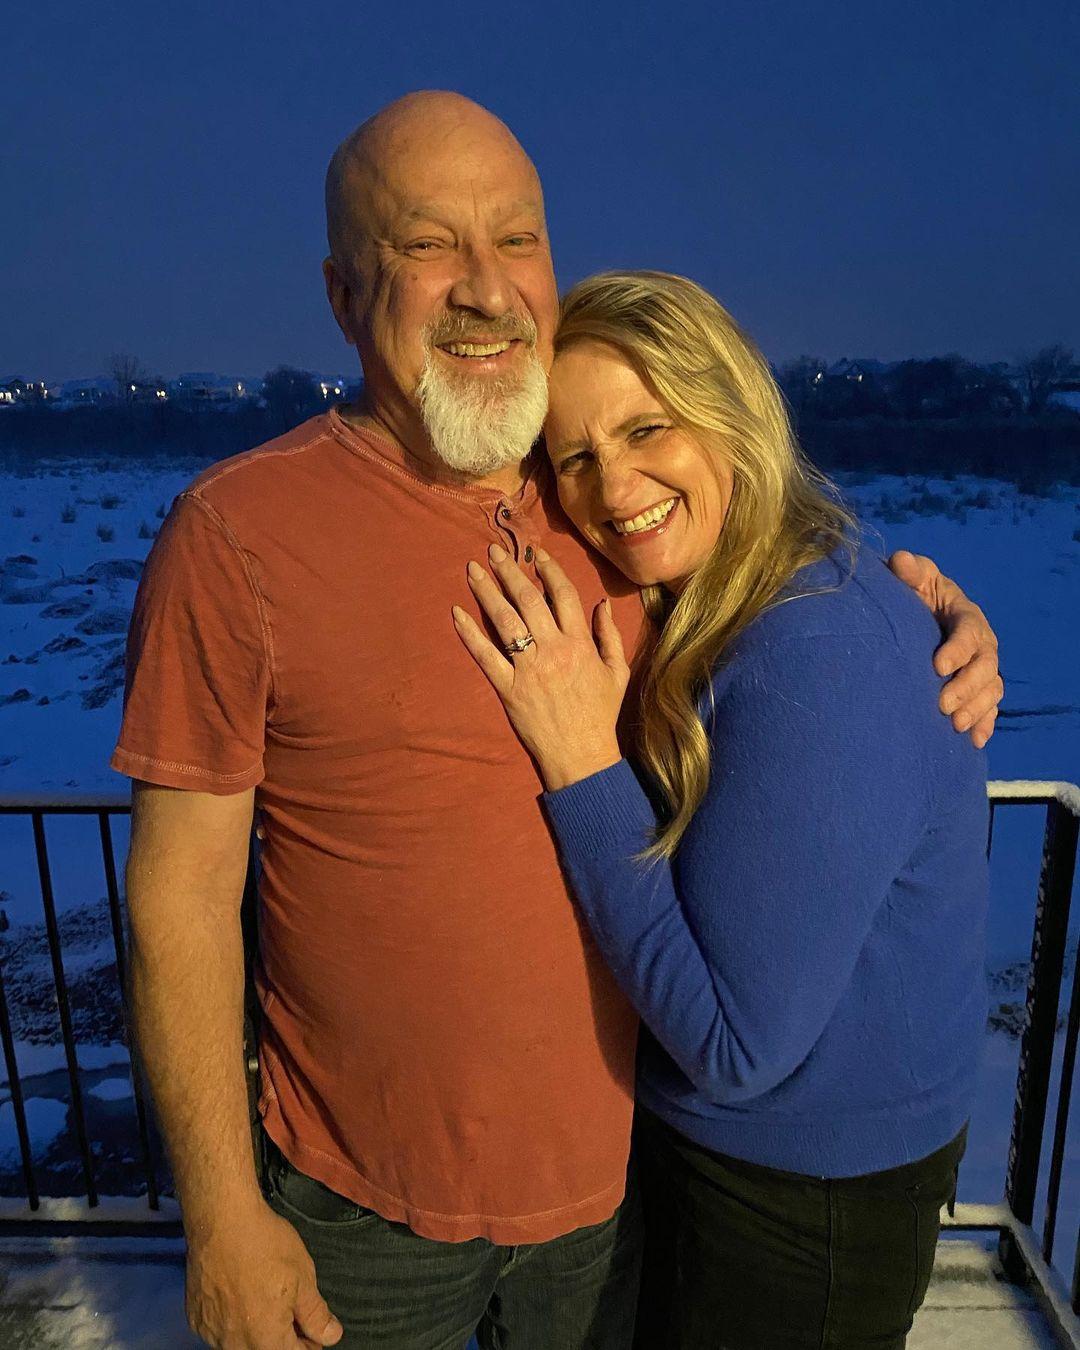 'Sister Wives' Star Christine Brown Gets Engaged To New Beau Nearly 2 Years After Kody Brown Split